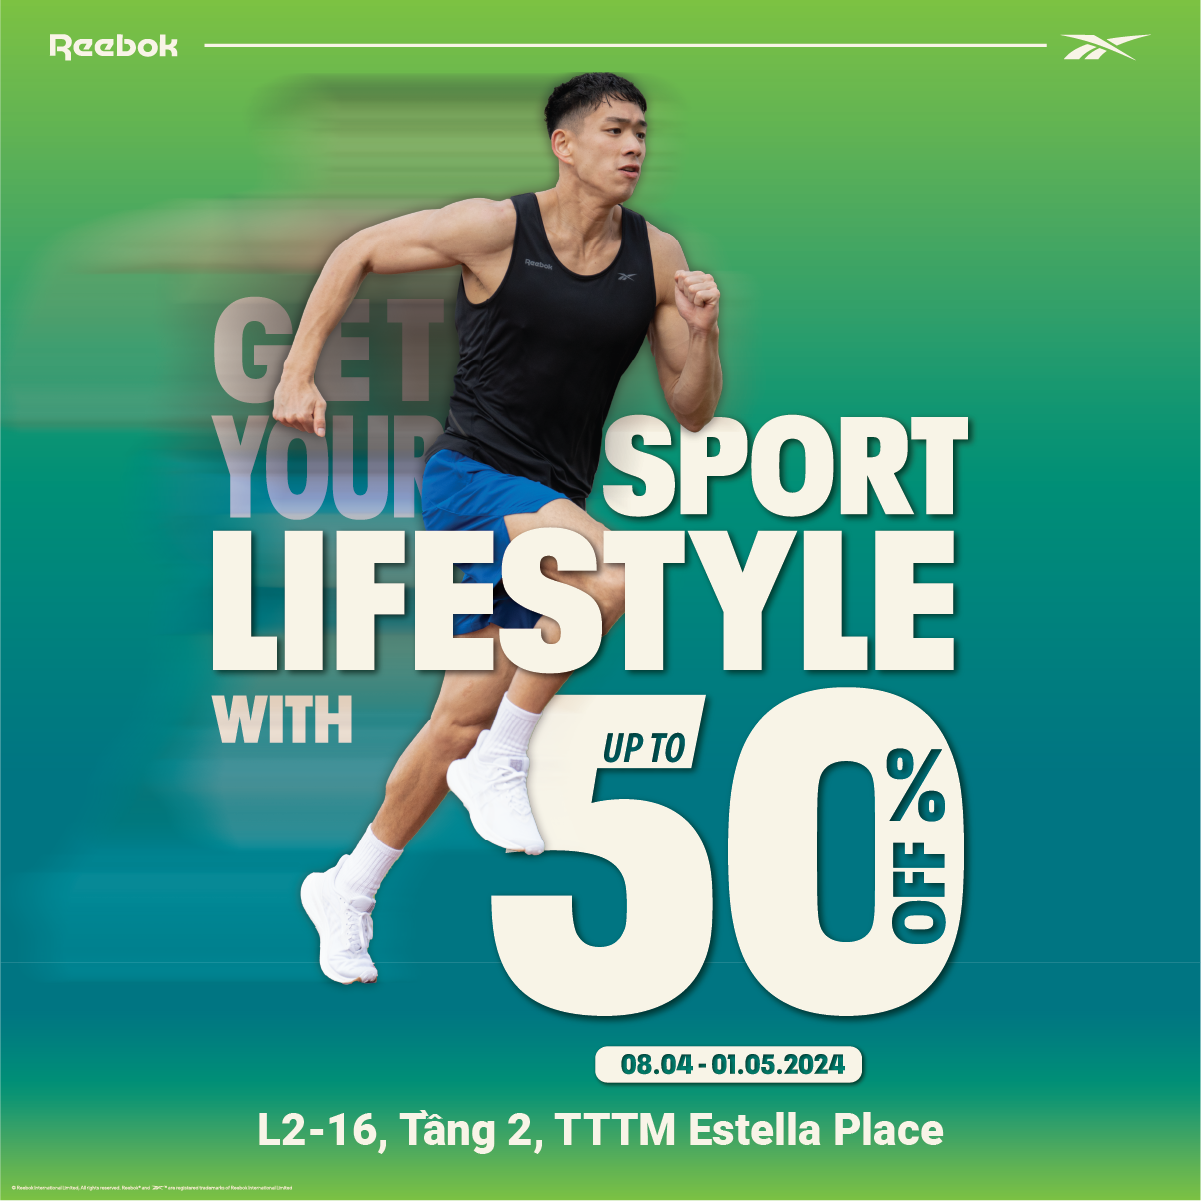 GET YOUR SPORT LIFESTYLE WITH UP TO 50% OFF!